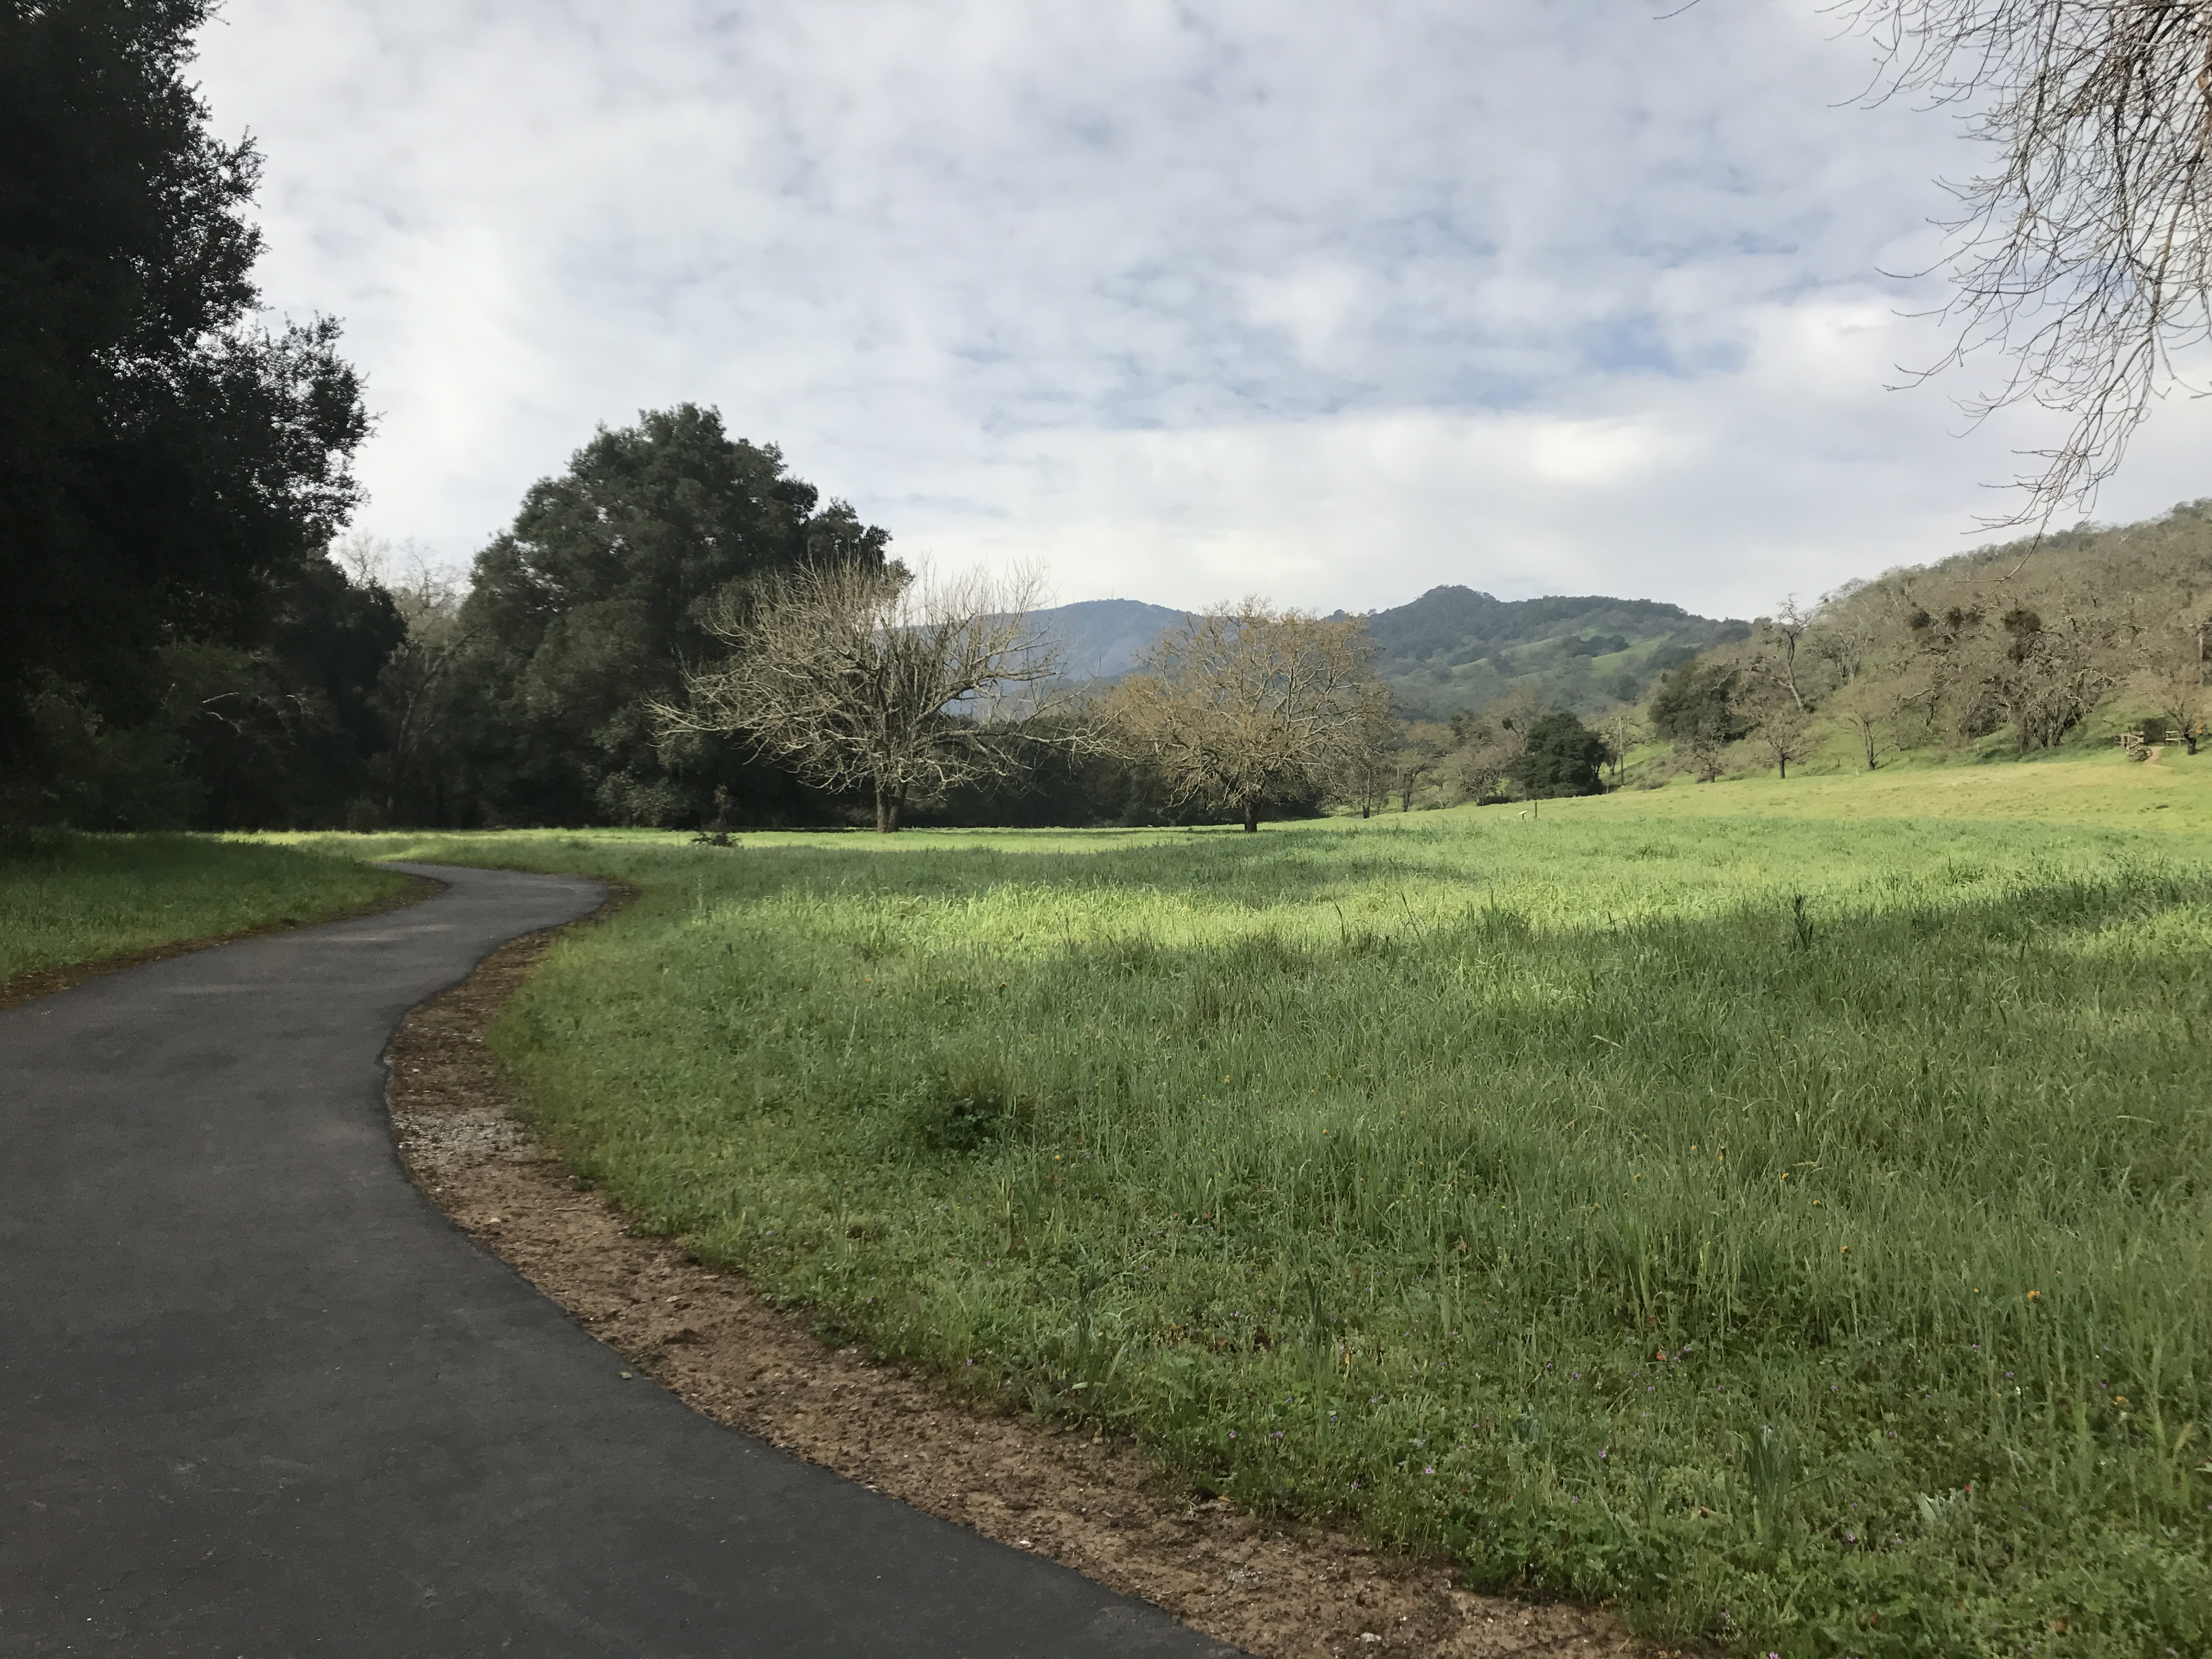 Paved, flat trail through a green field with hills and trees in distance